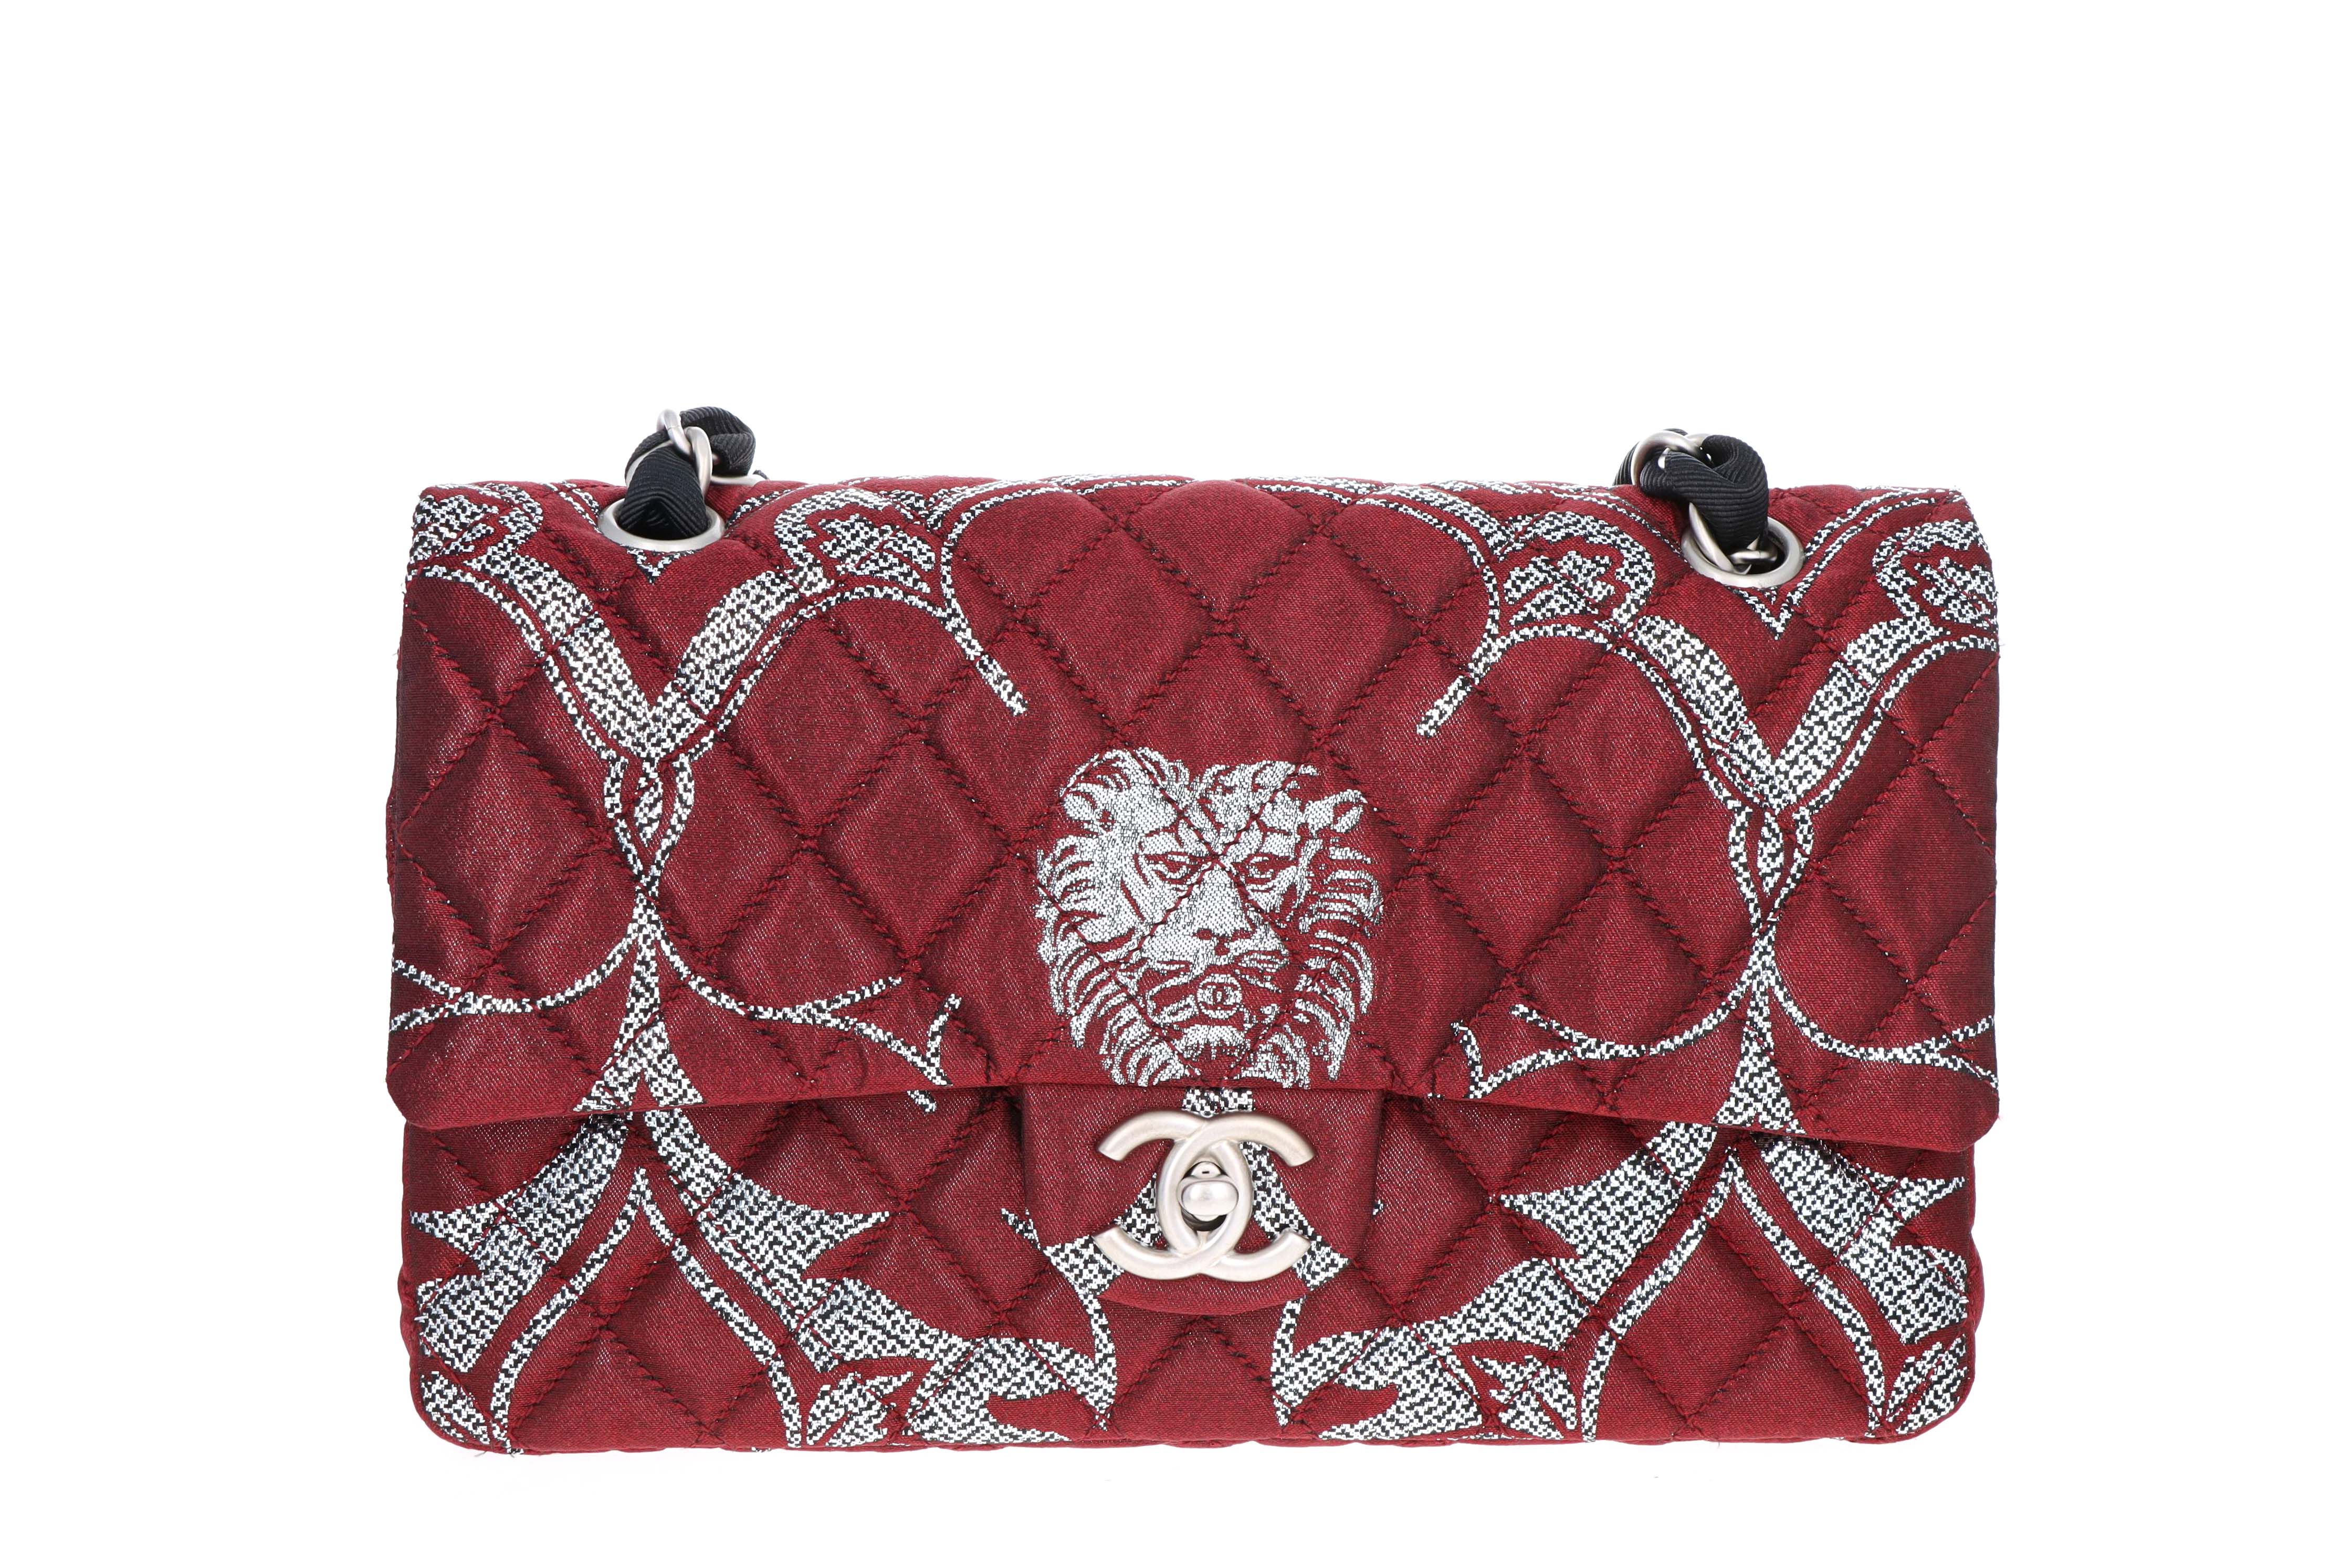 CHANEL RARE LIMITED EDITION PARIS MOSCOW LION BROCADE DOUBLE FLAP